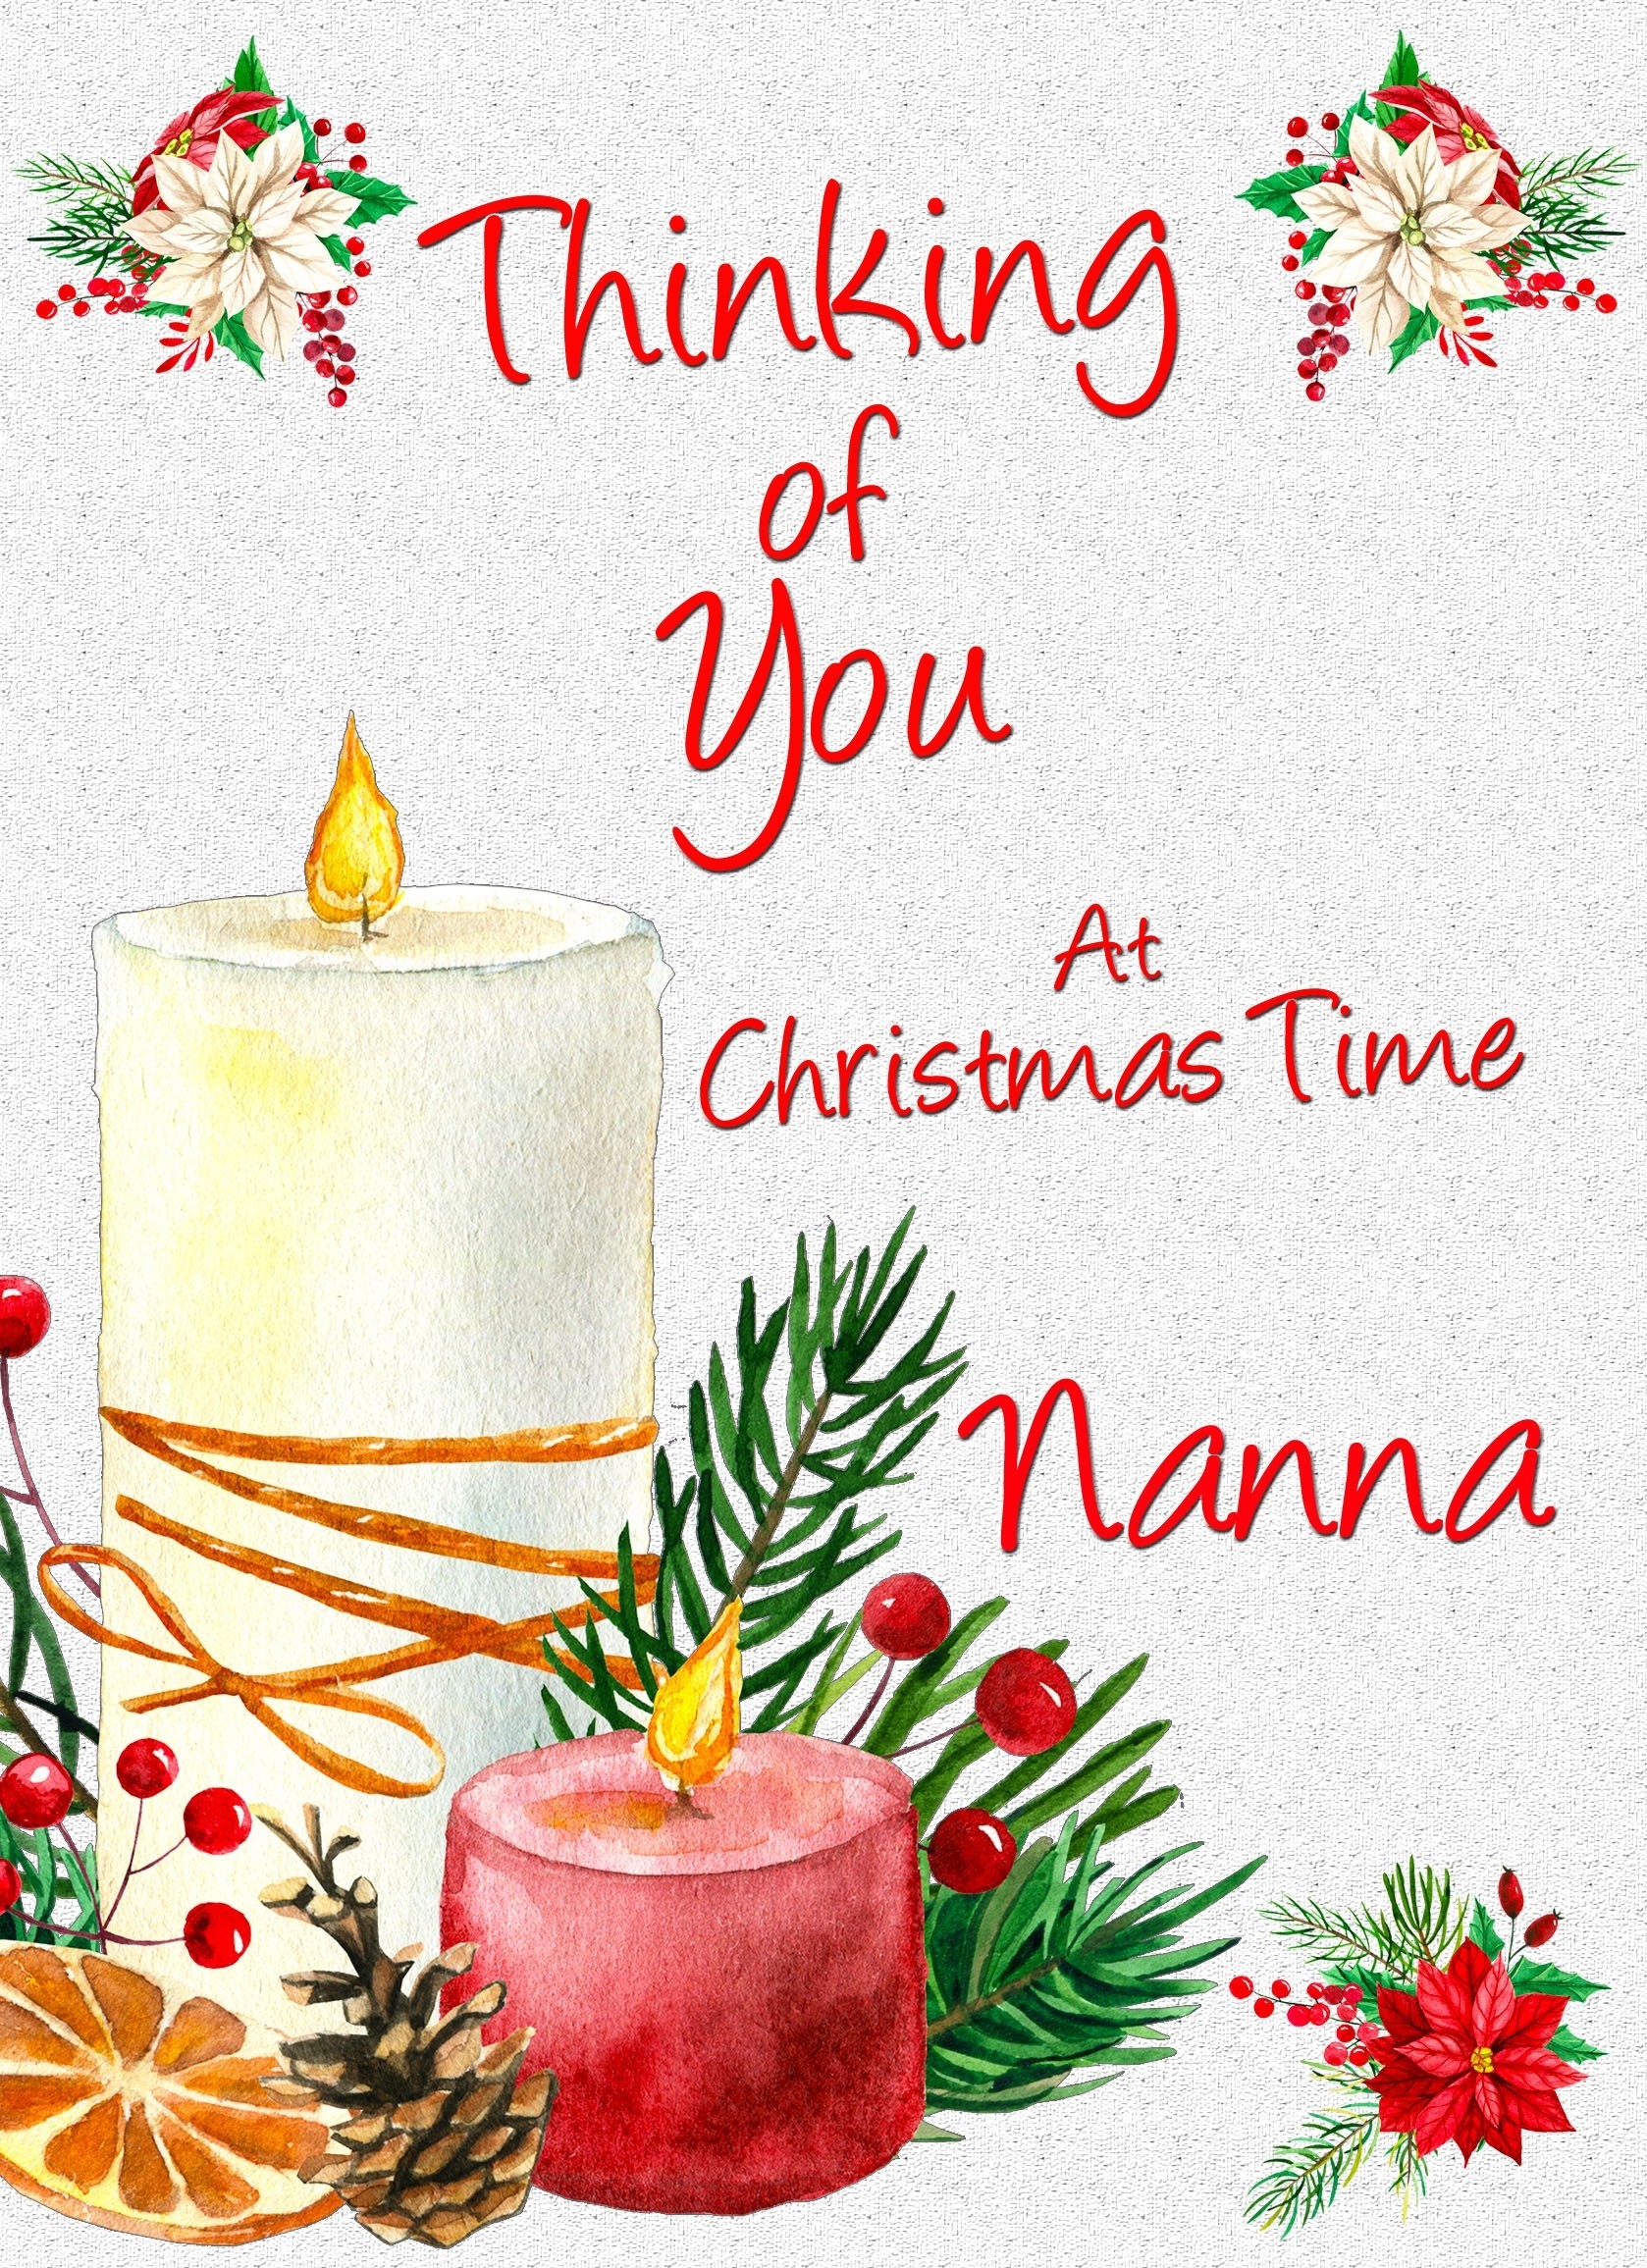 Thinking of You at Christmas Card For Nanna (Candle)